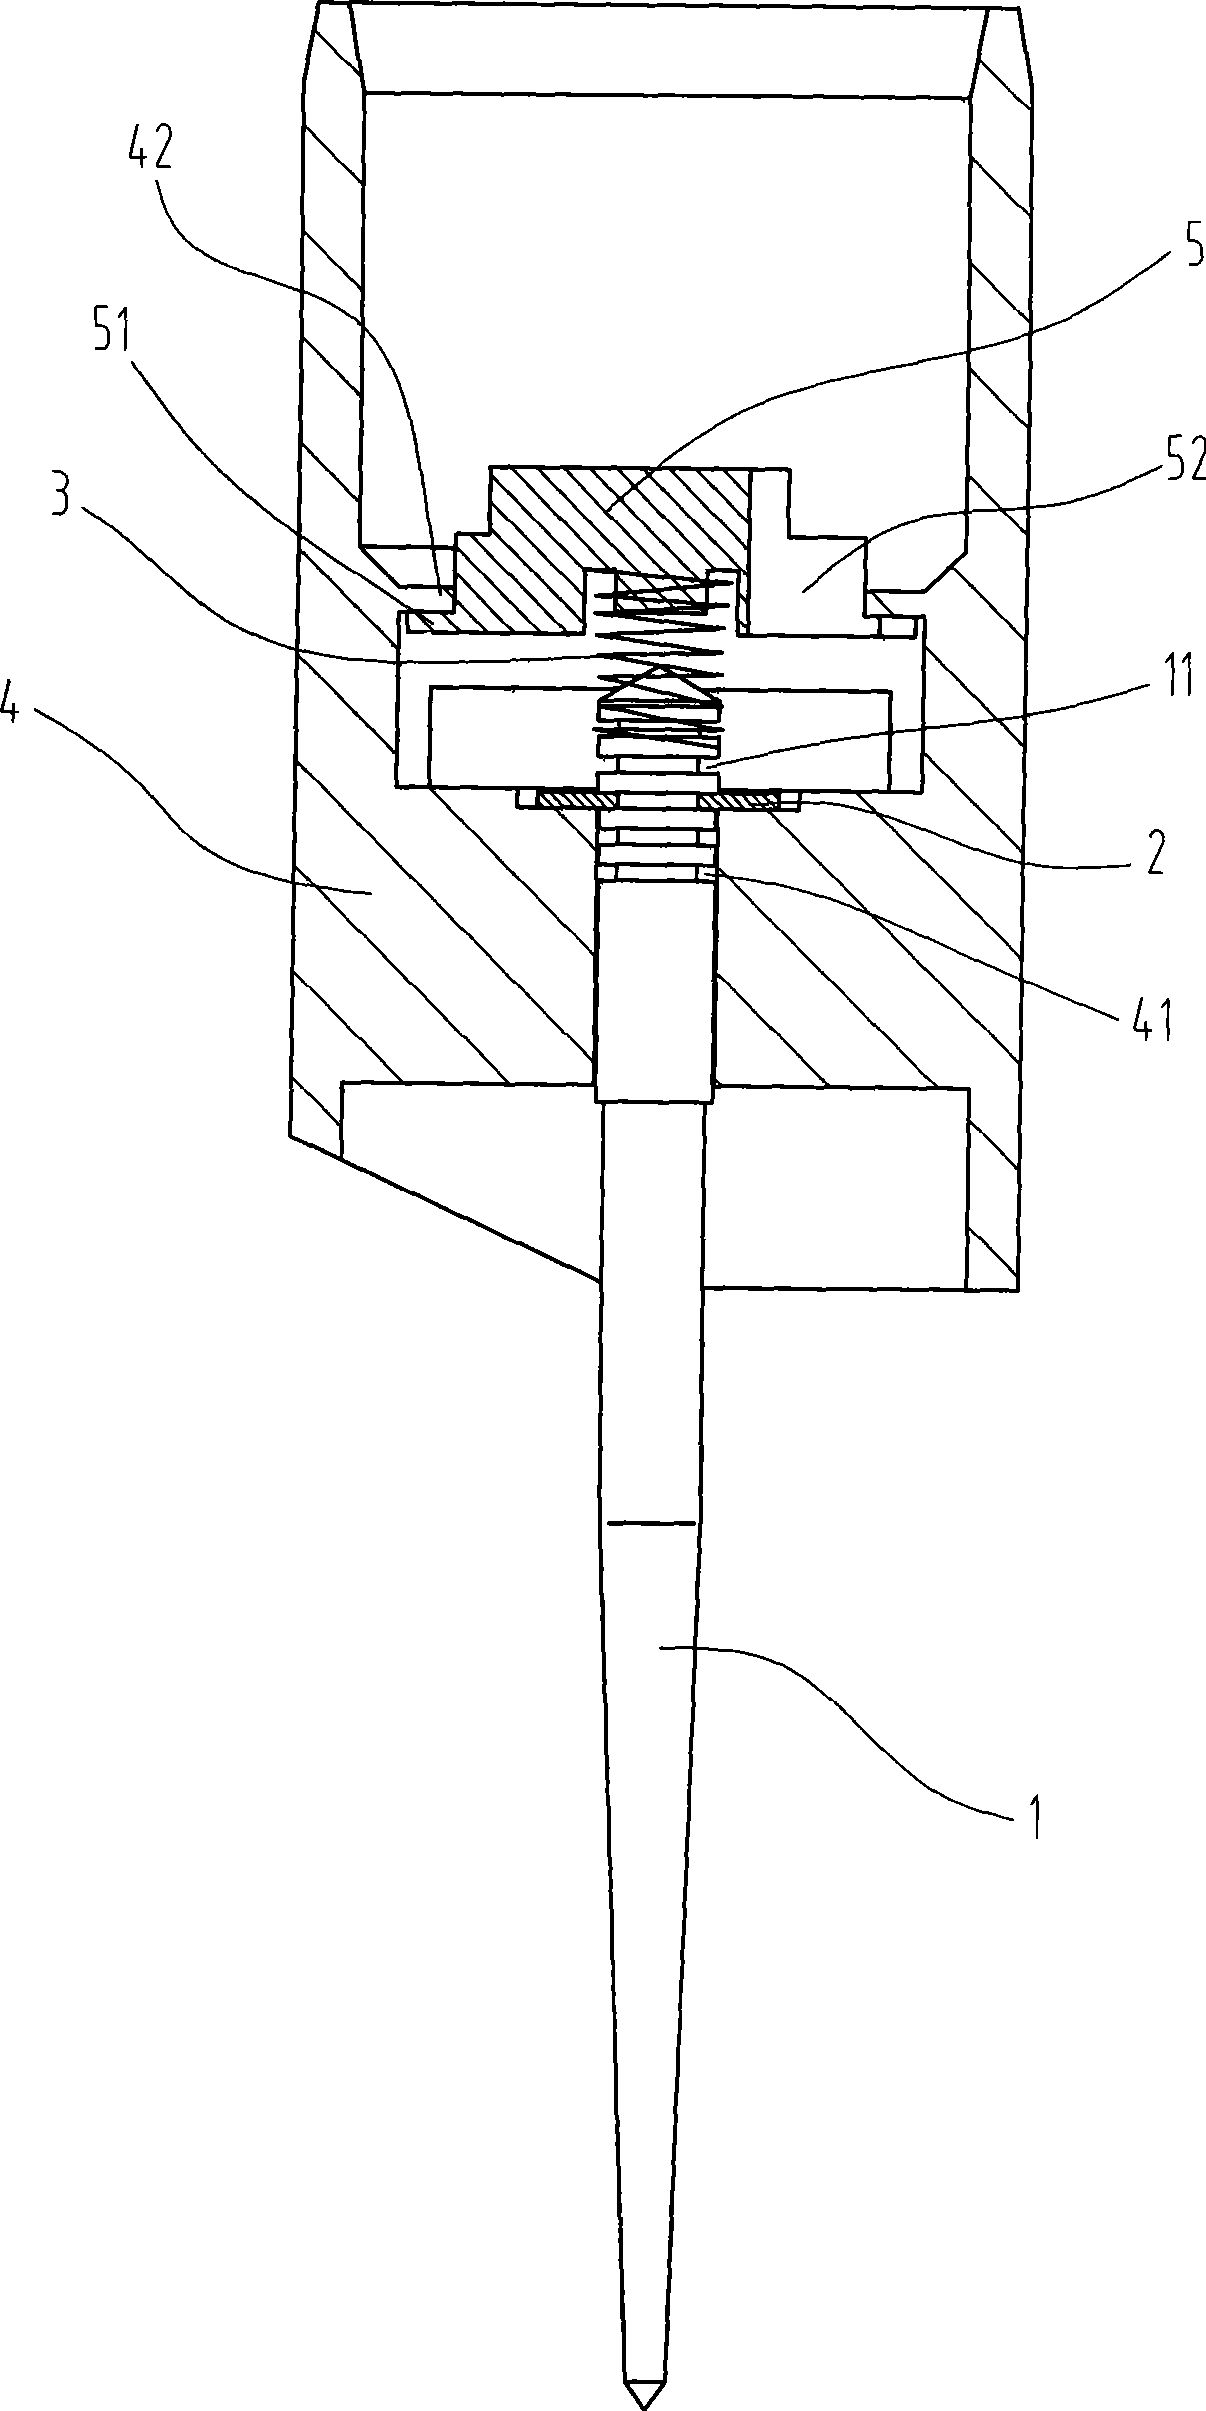 Mounting structure for carburetor needle valve